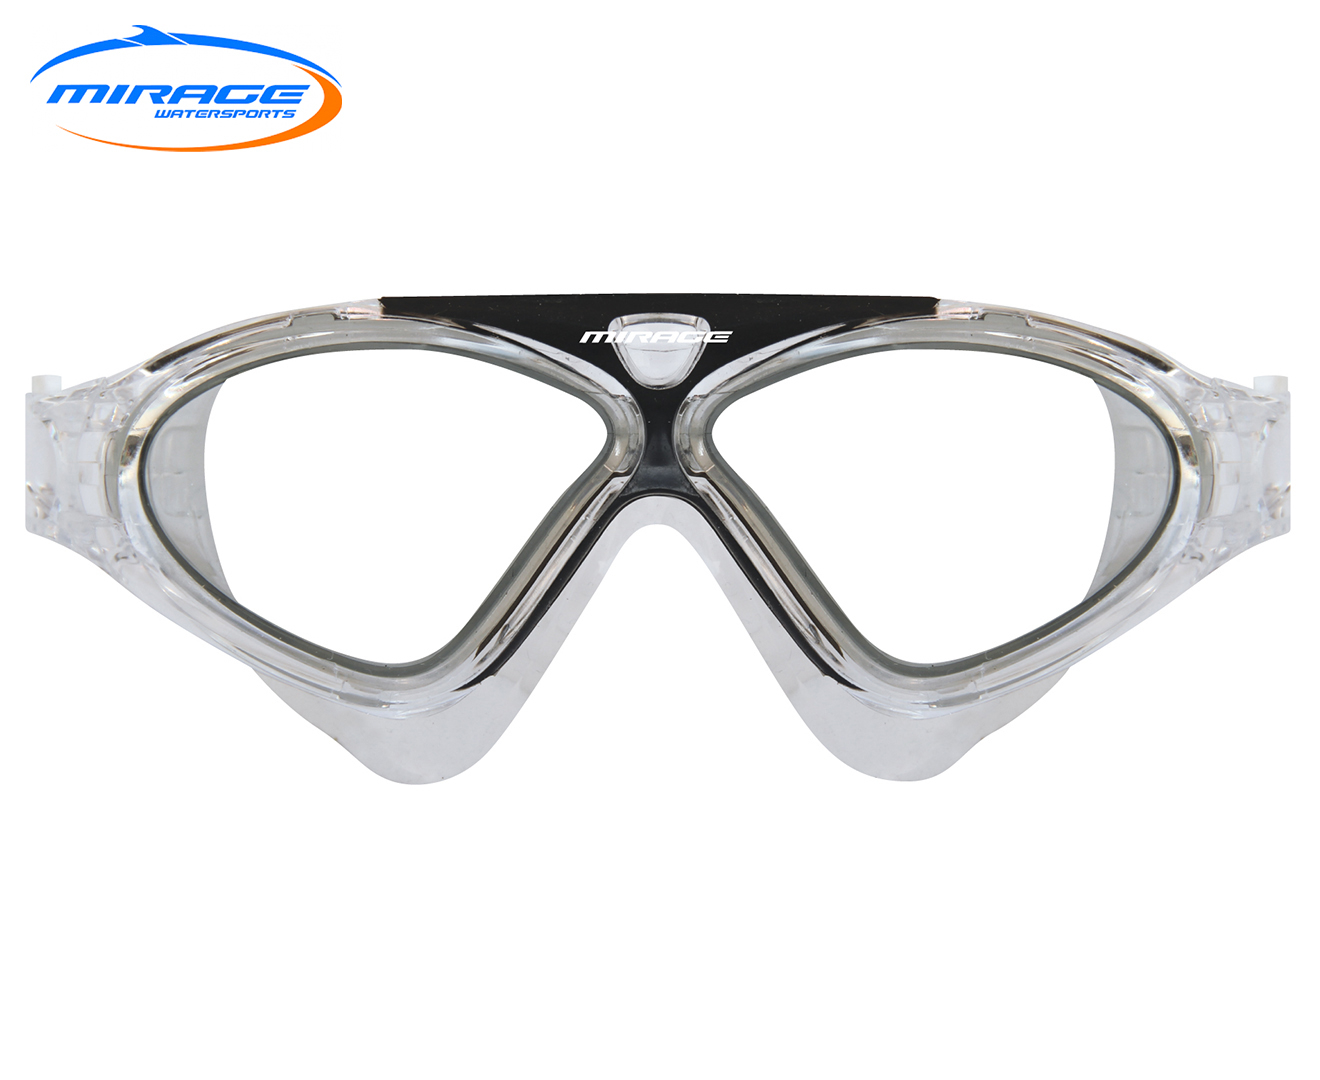 Mirage Adult Lethal Swim Goggles Clearblack Au